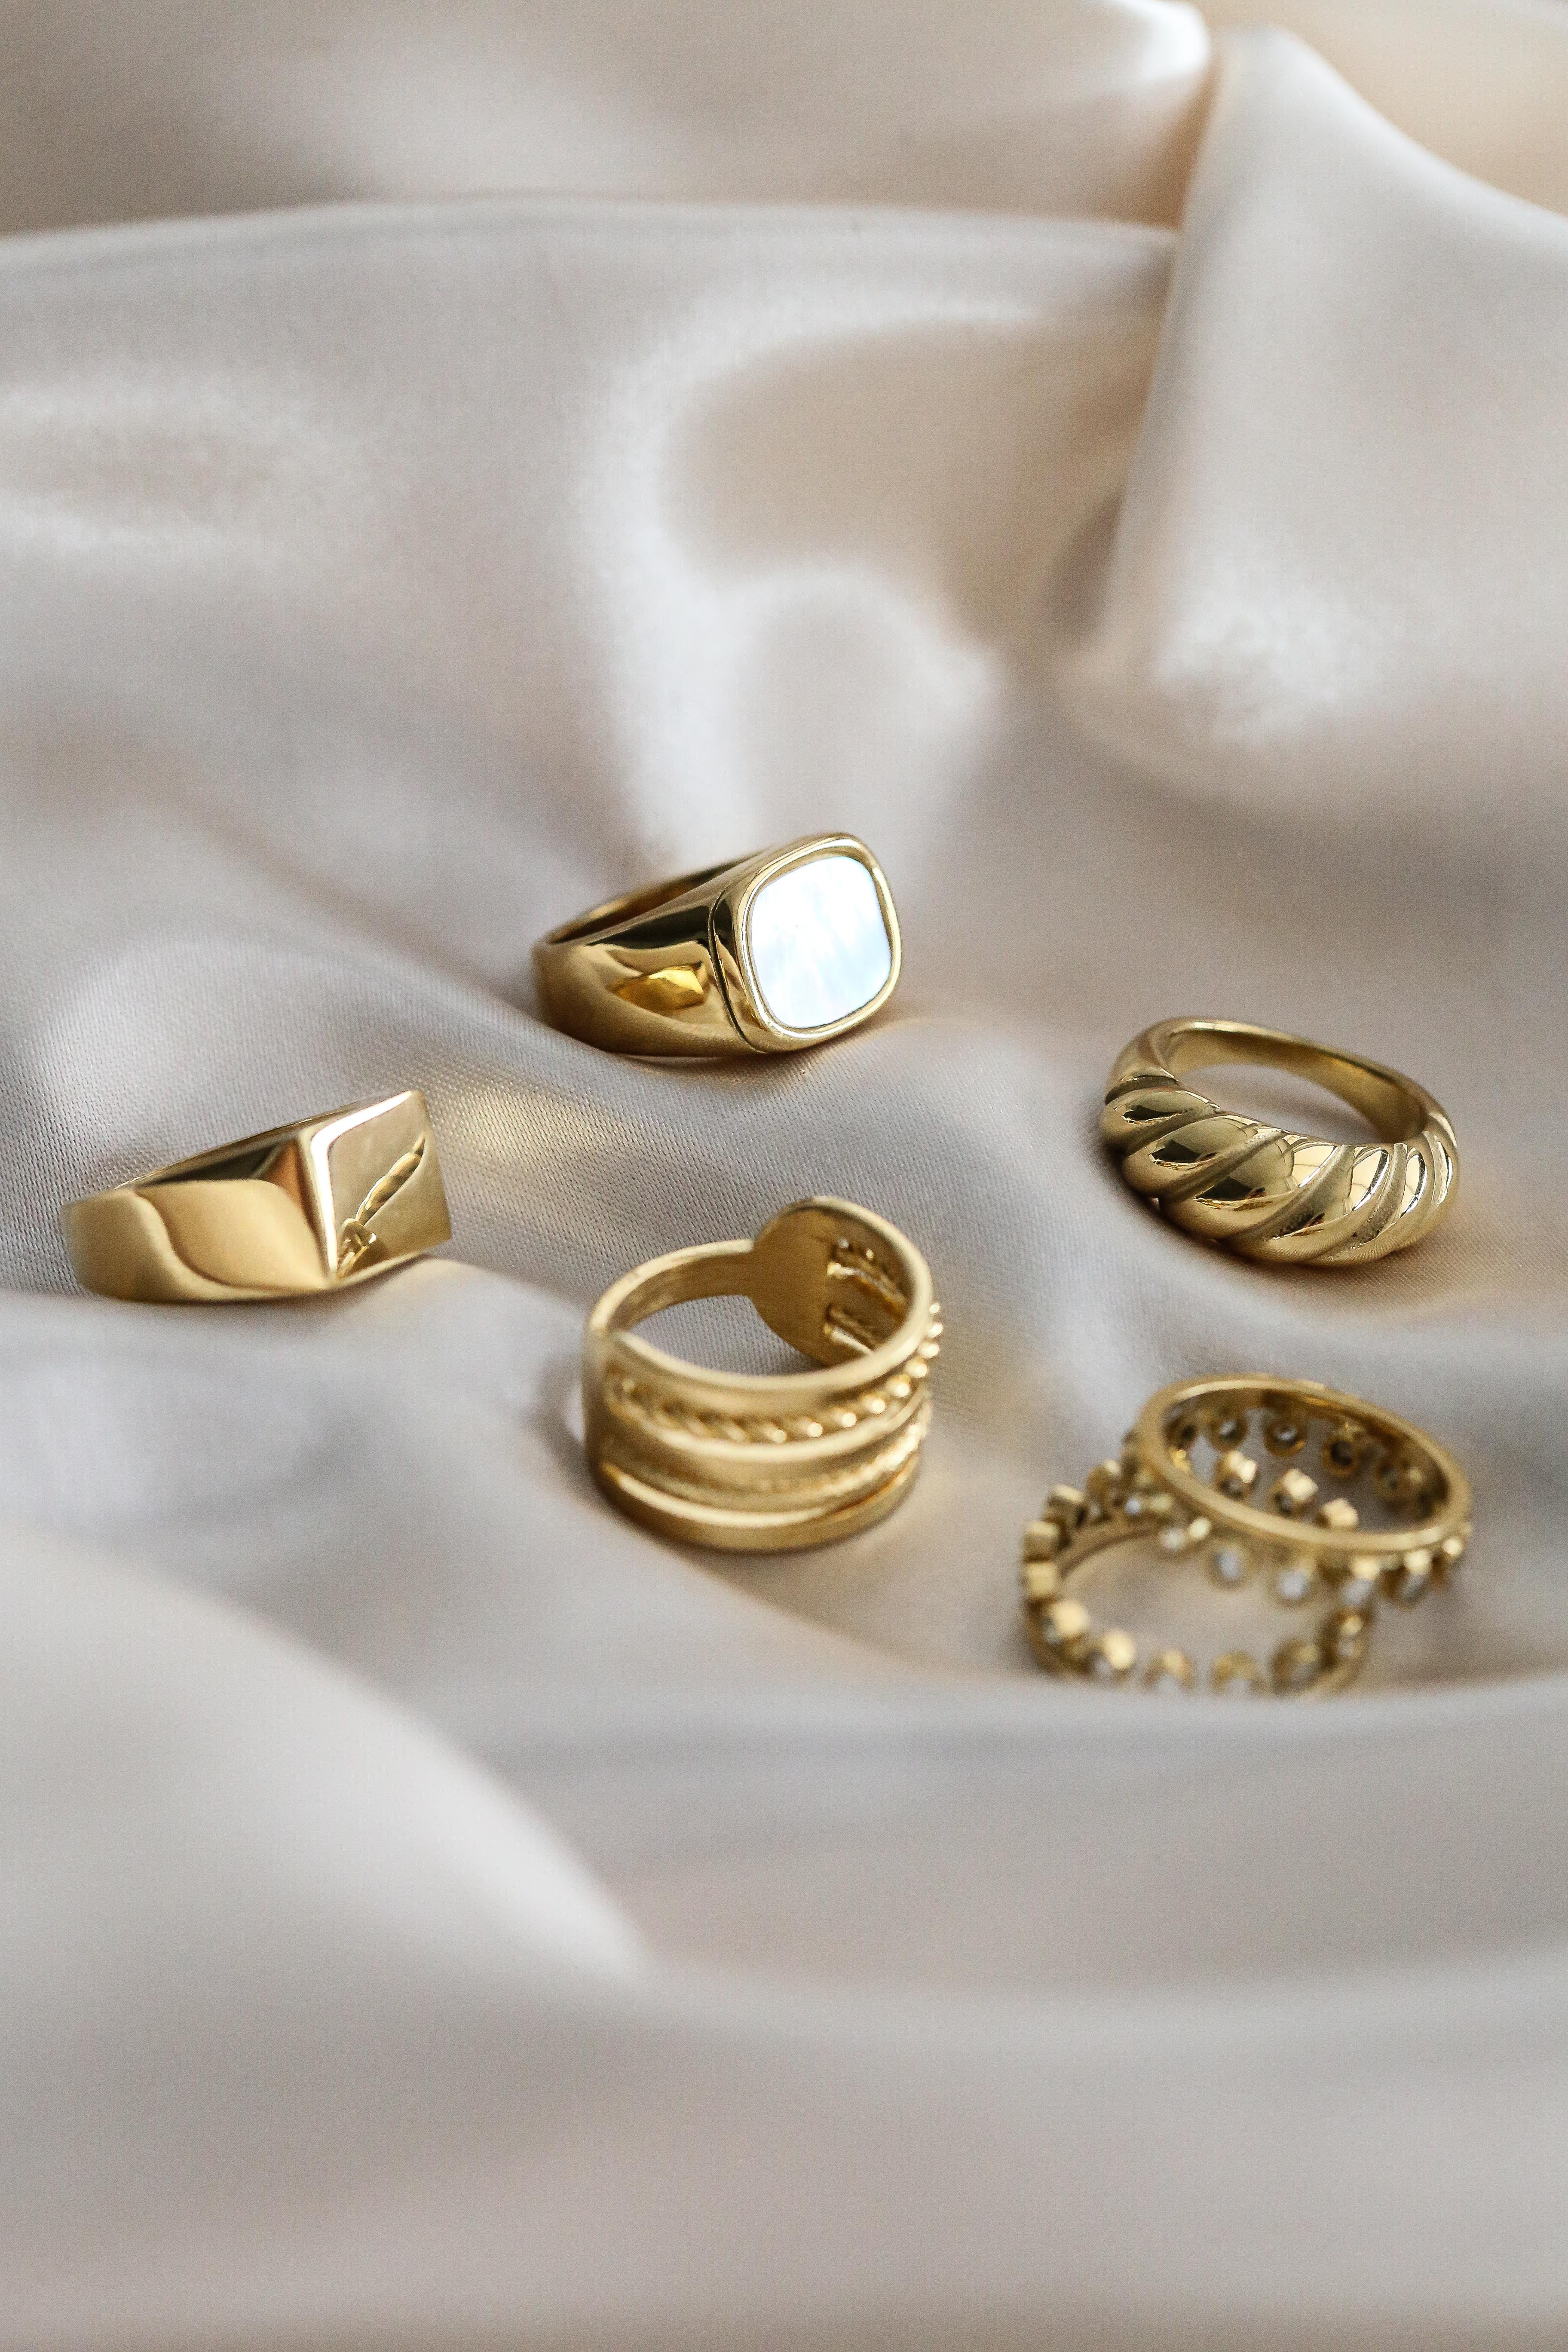 Anita Ring - Boutique Minimaliste has waterproof, durable, elegant and vintage inspired jewelry